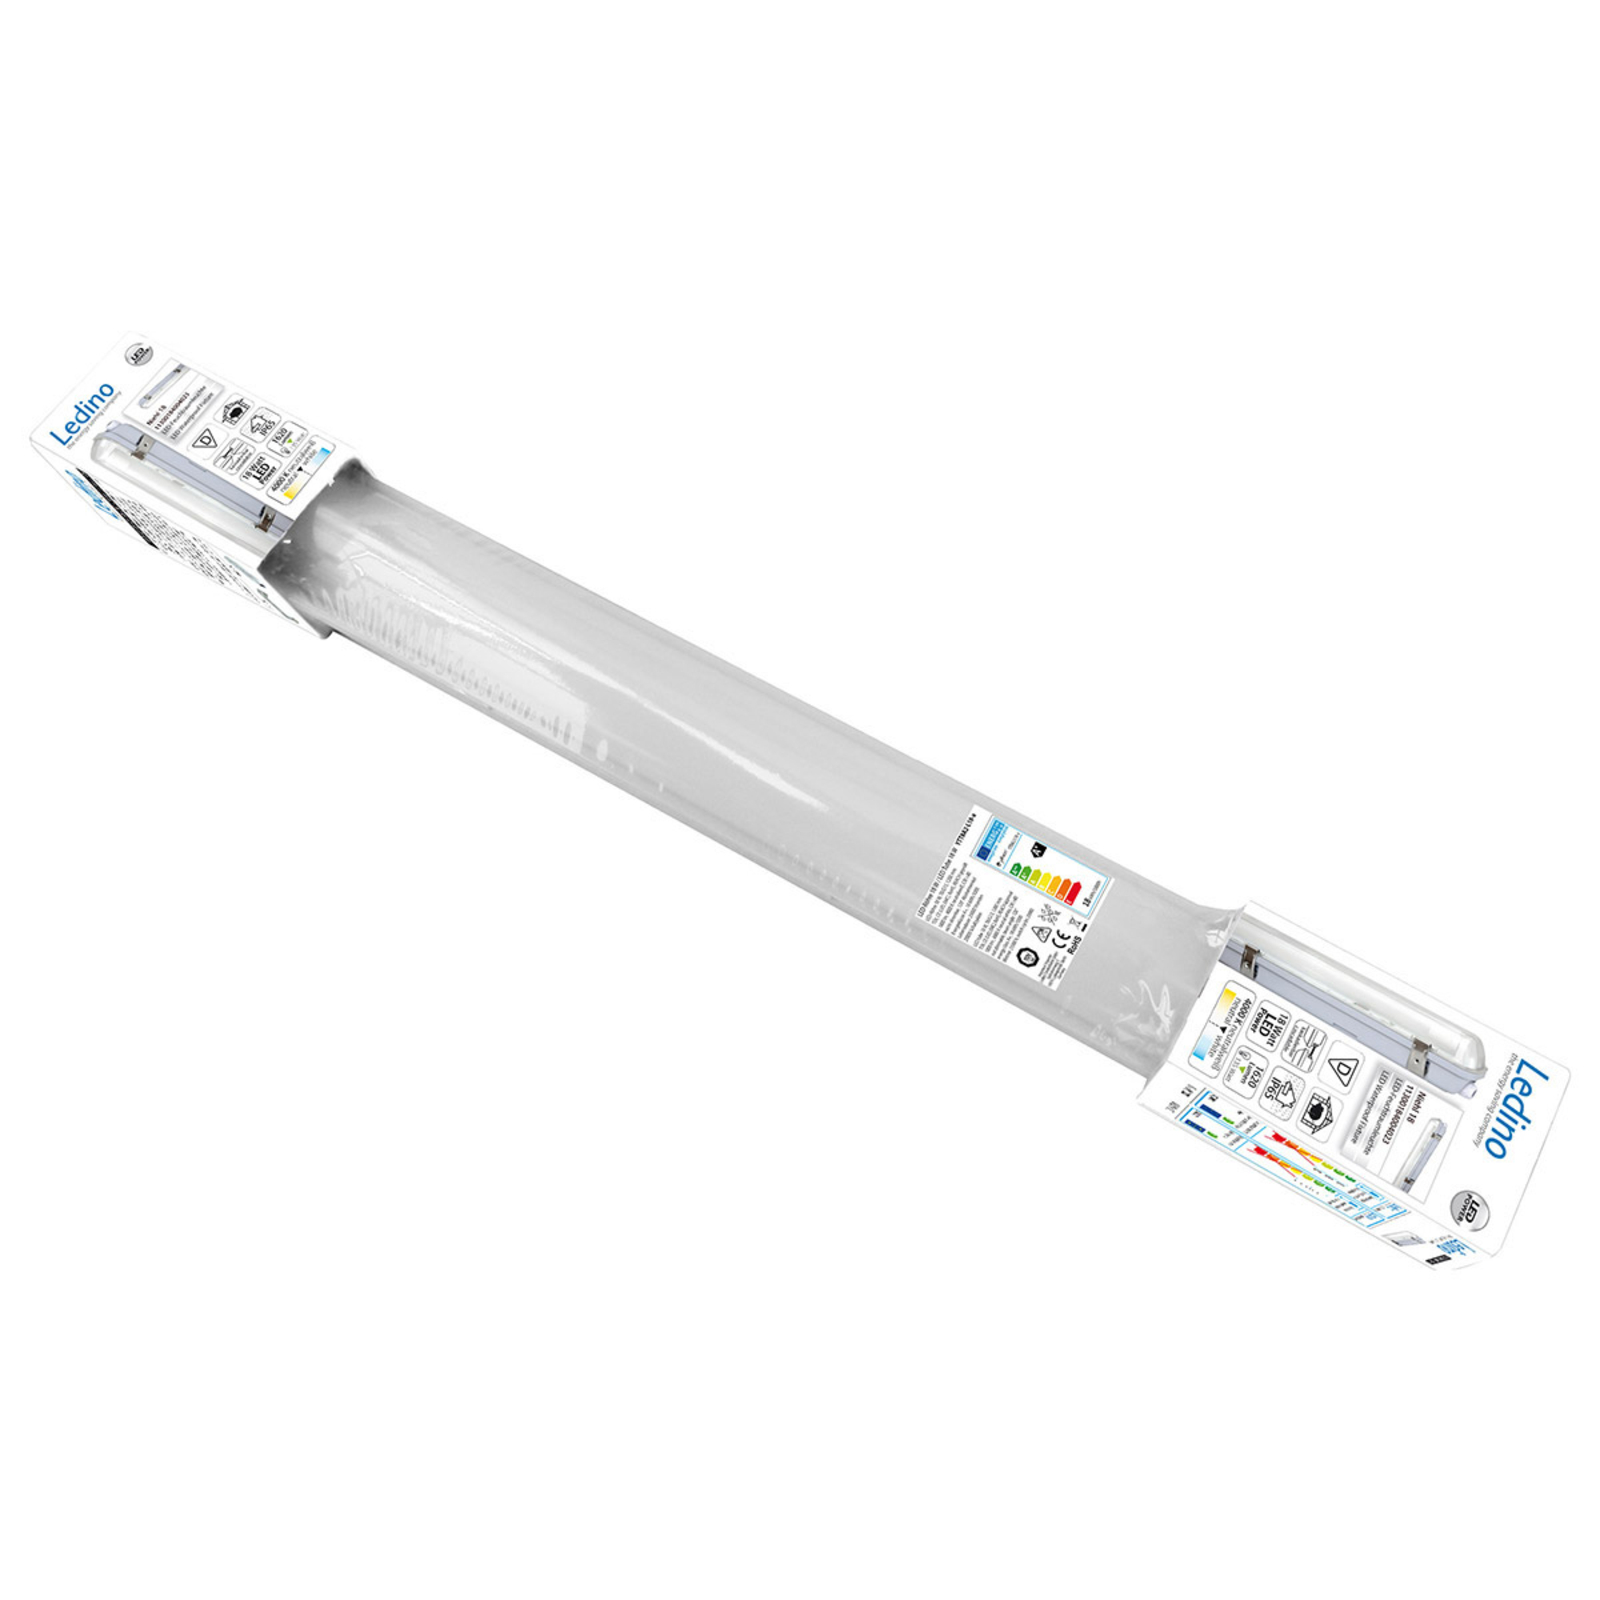 Luminaire pièces humides LED Niehl 18 IP65 18 W